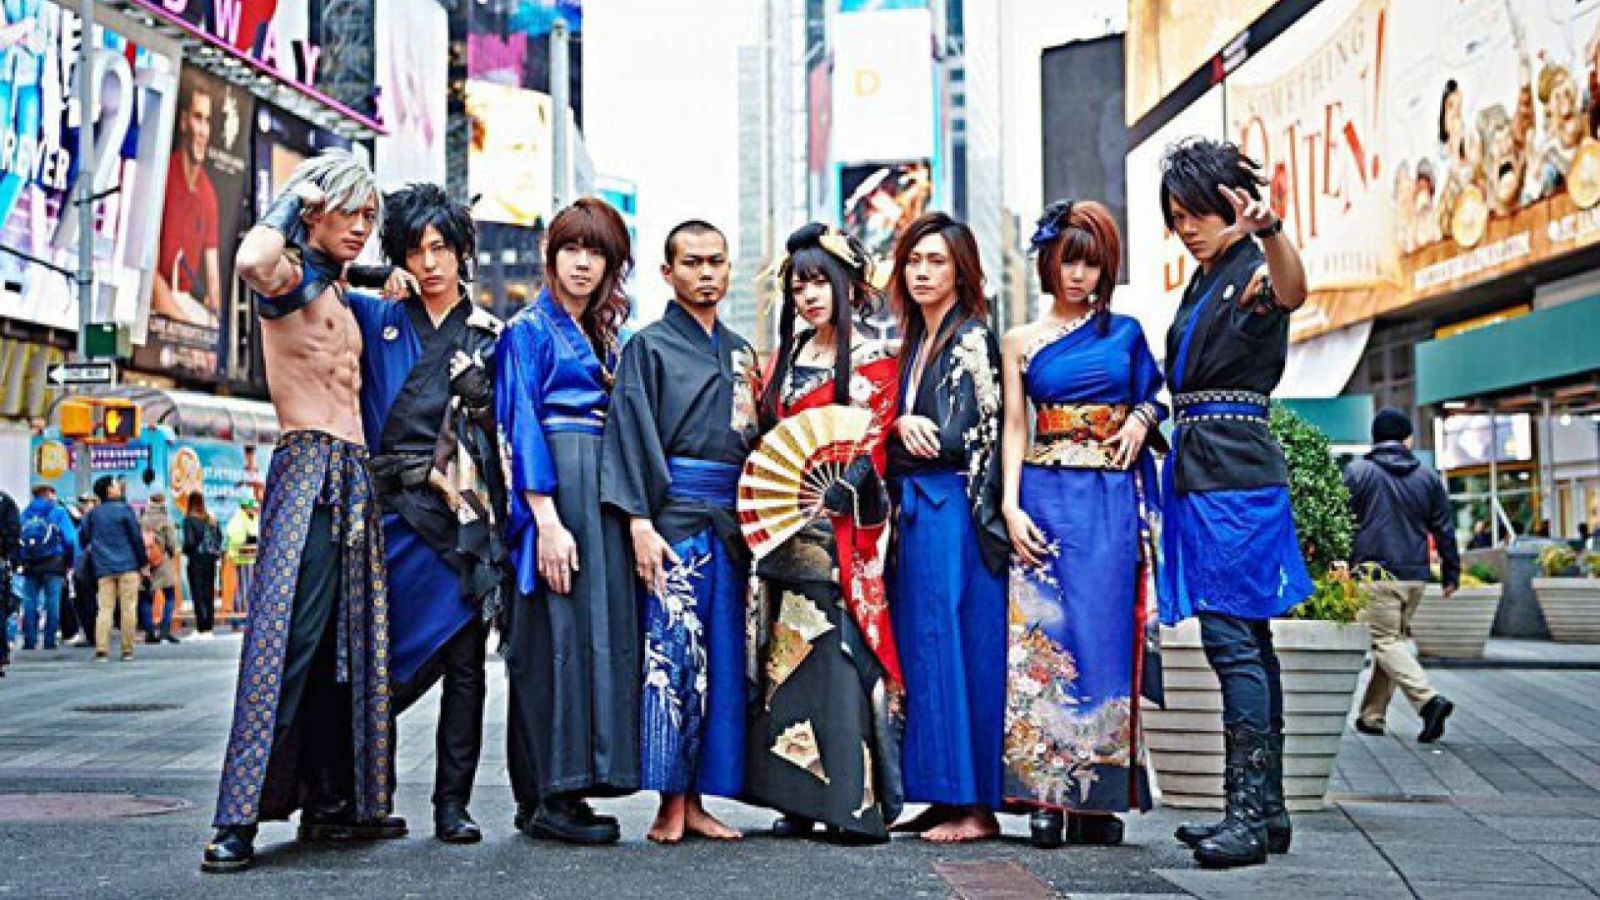 Wywiad z WagakkiBand © 2016 avex music creative. All rights reserved.